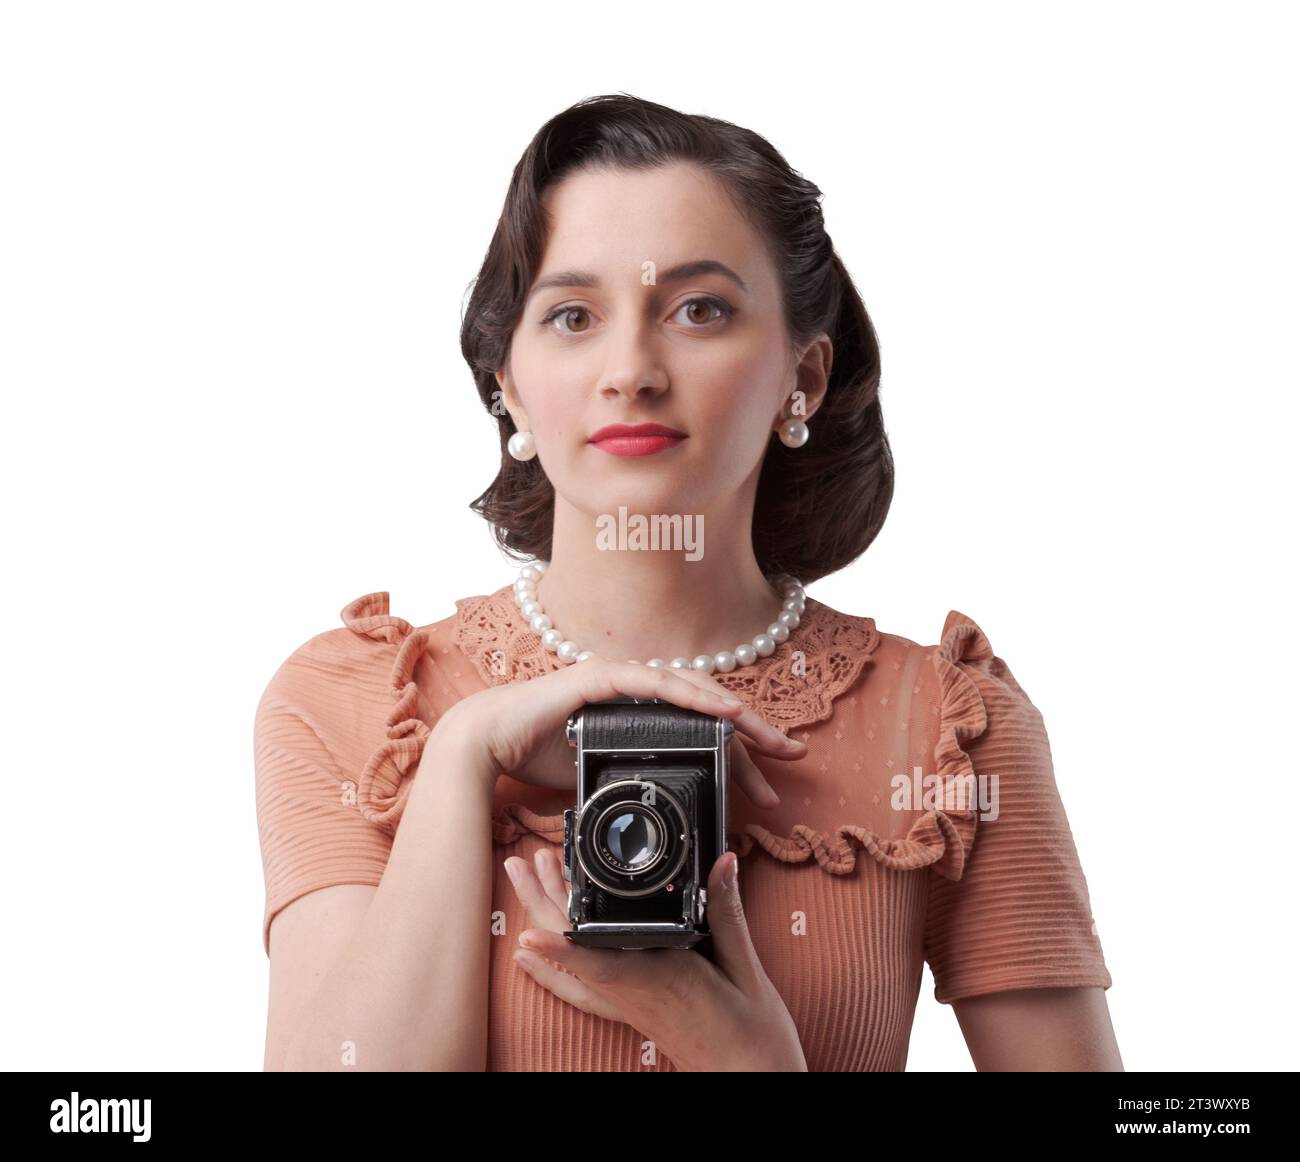 Beautiful elegant woman taking pictures with a vintage camera Stock Photo